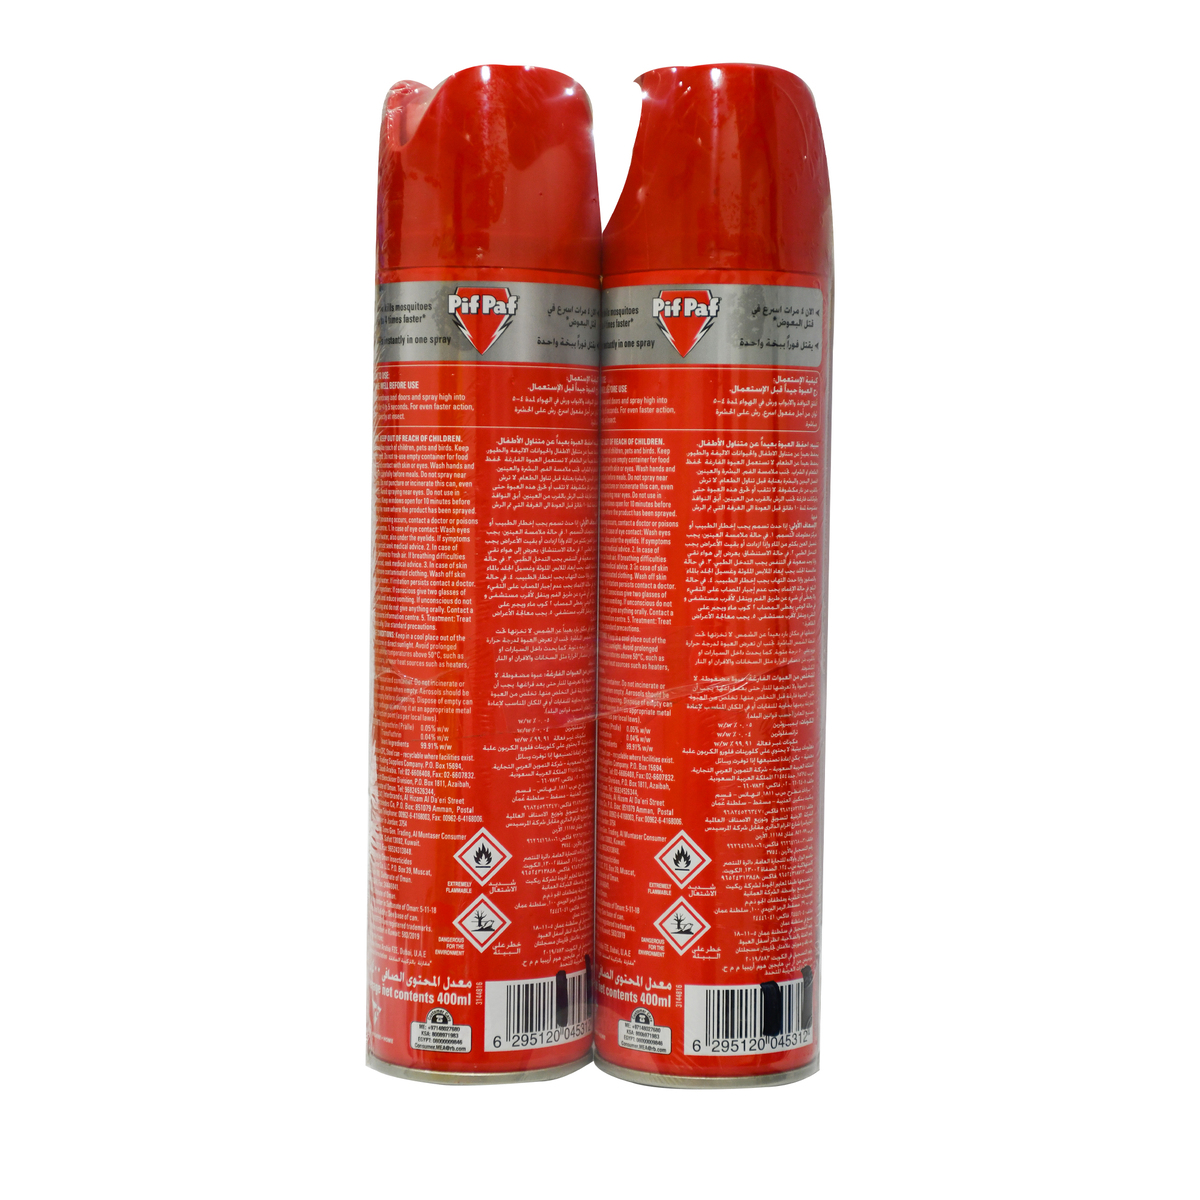 Pif Paf Instakill Mosquito Killer 2 x 400 ml